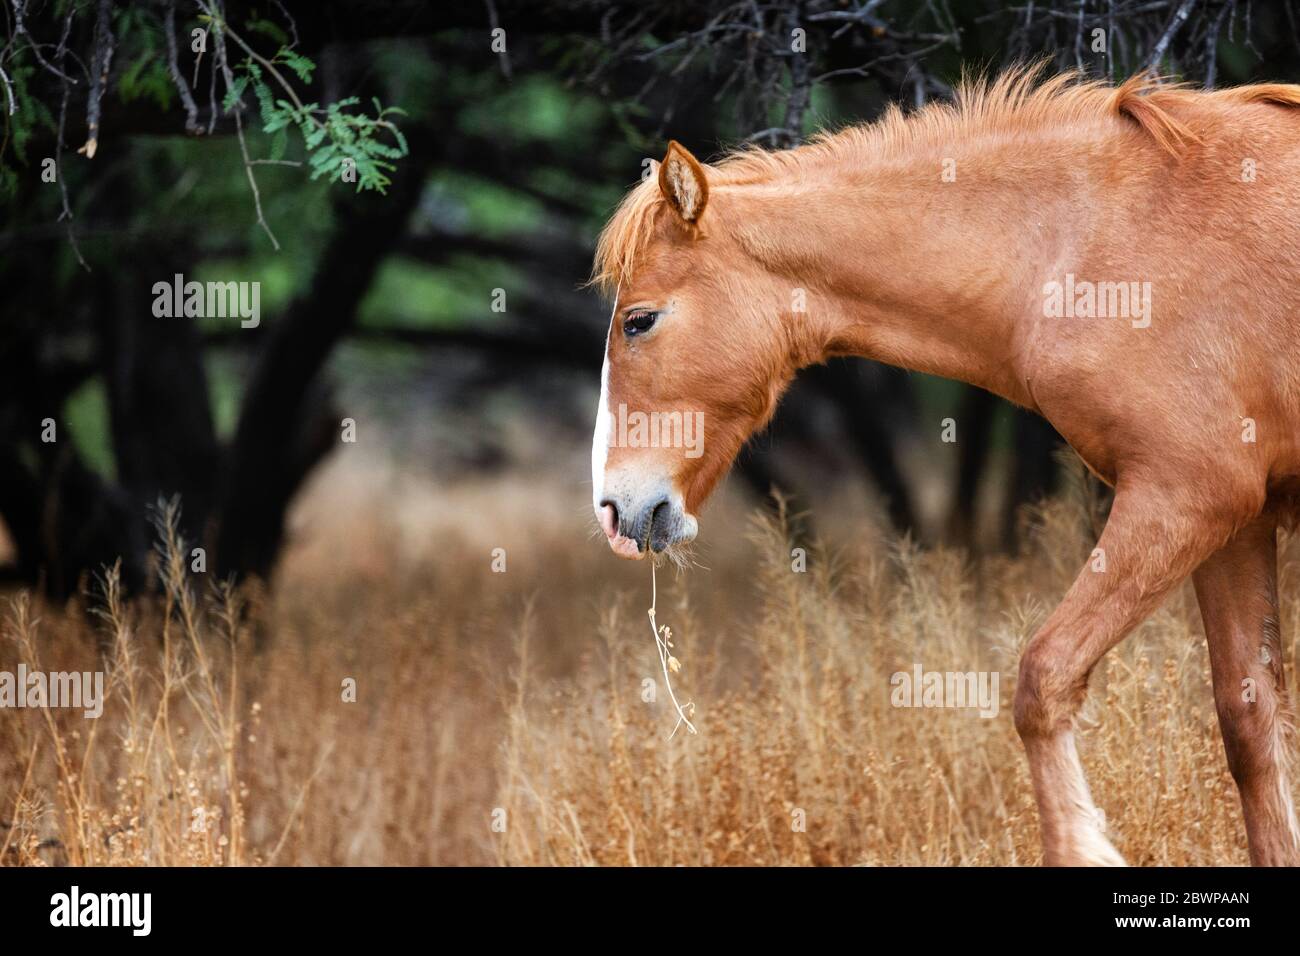 Closeup of beautiful young wild horse with grass in mouth. Stock Photo